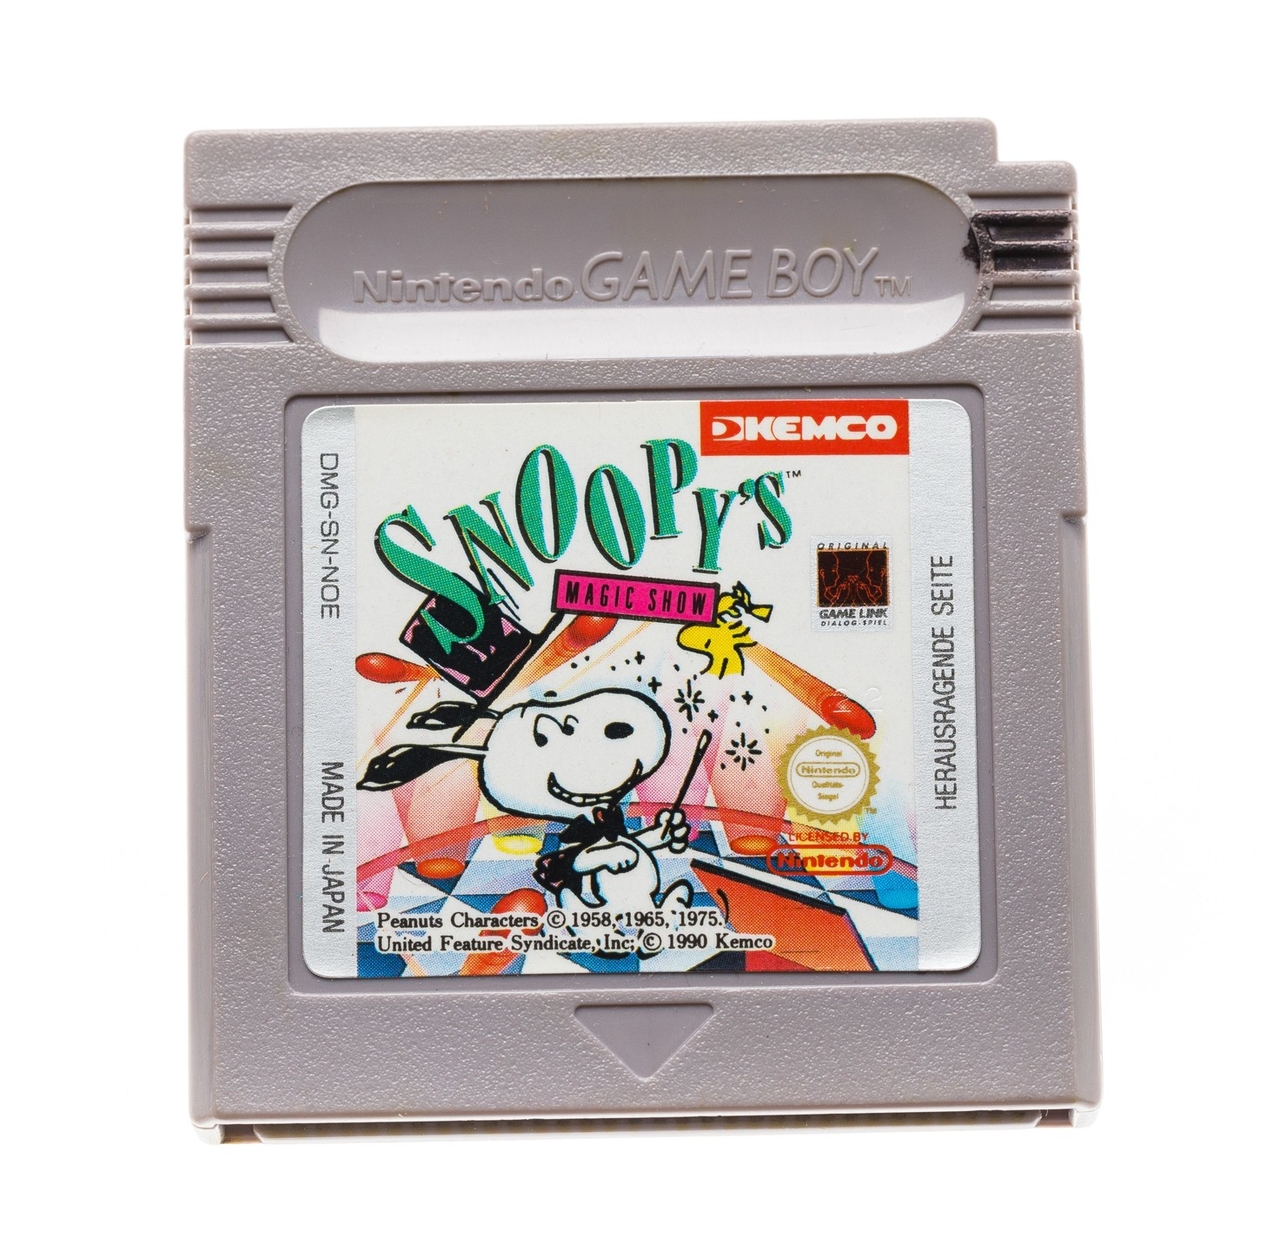 Snoopy's Magic Show - Gameboy Classic Games